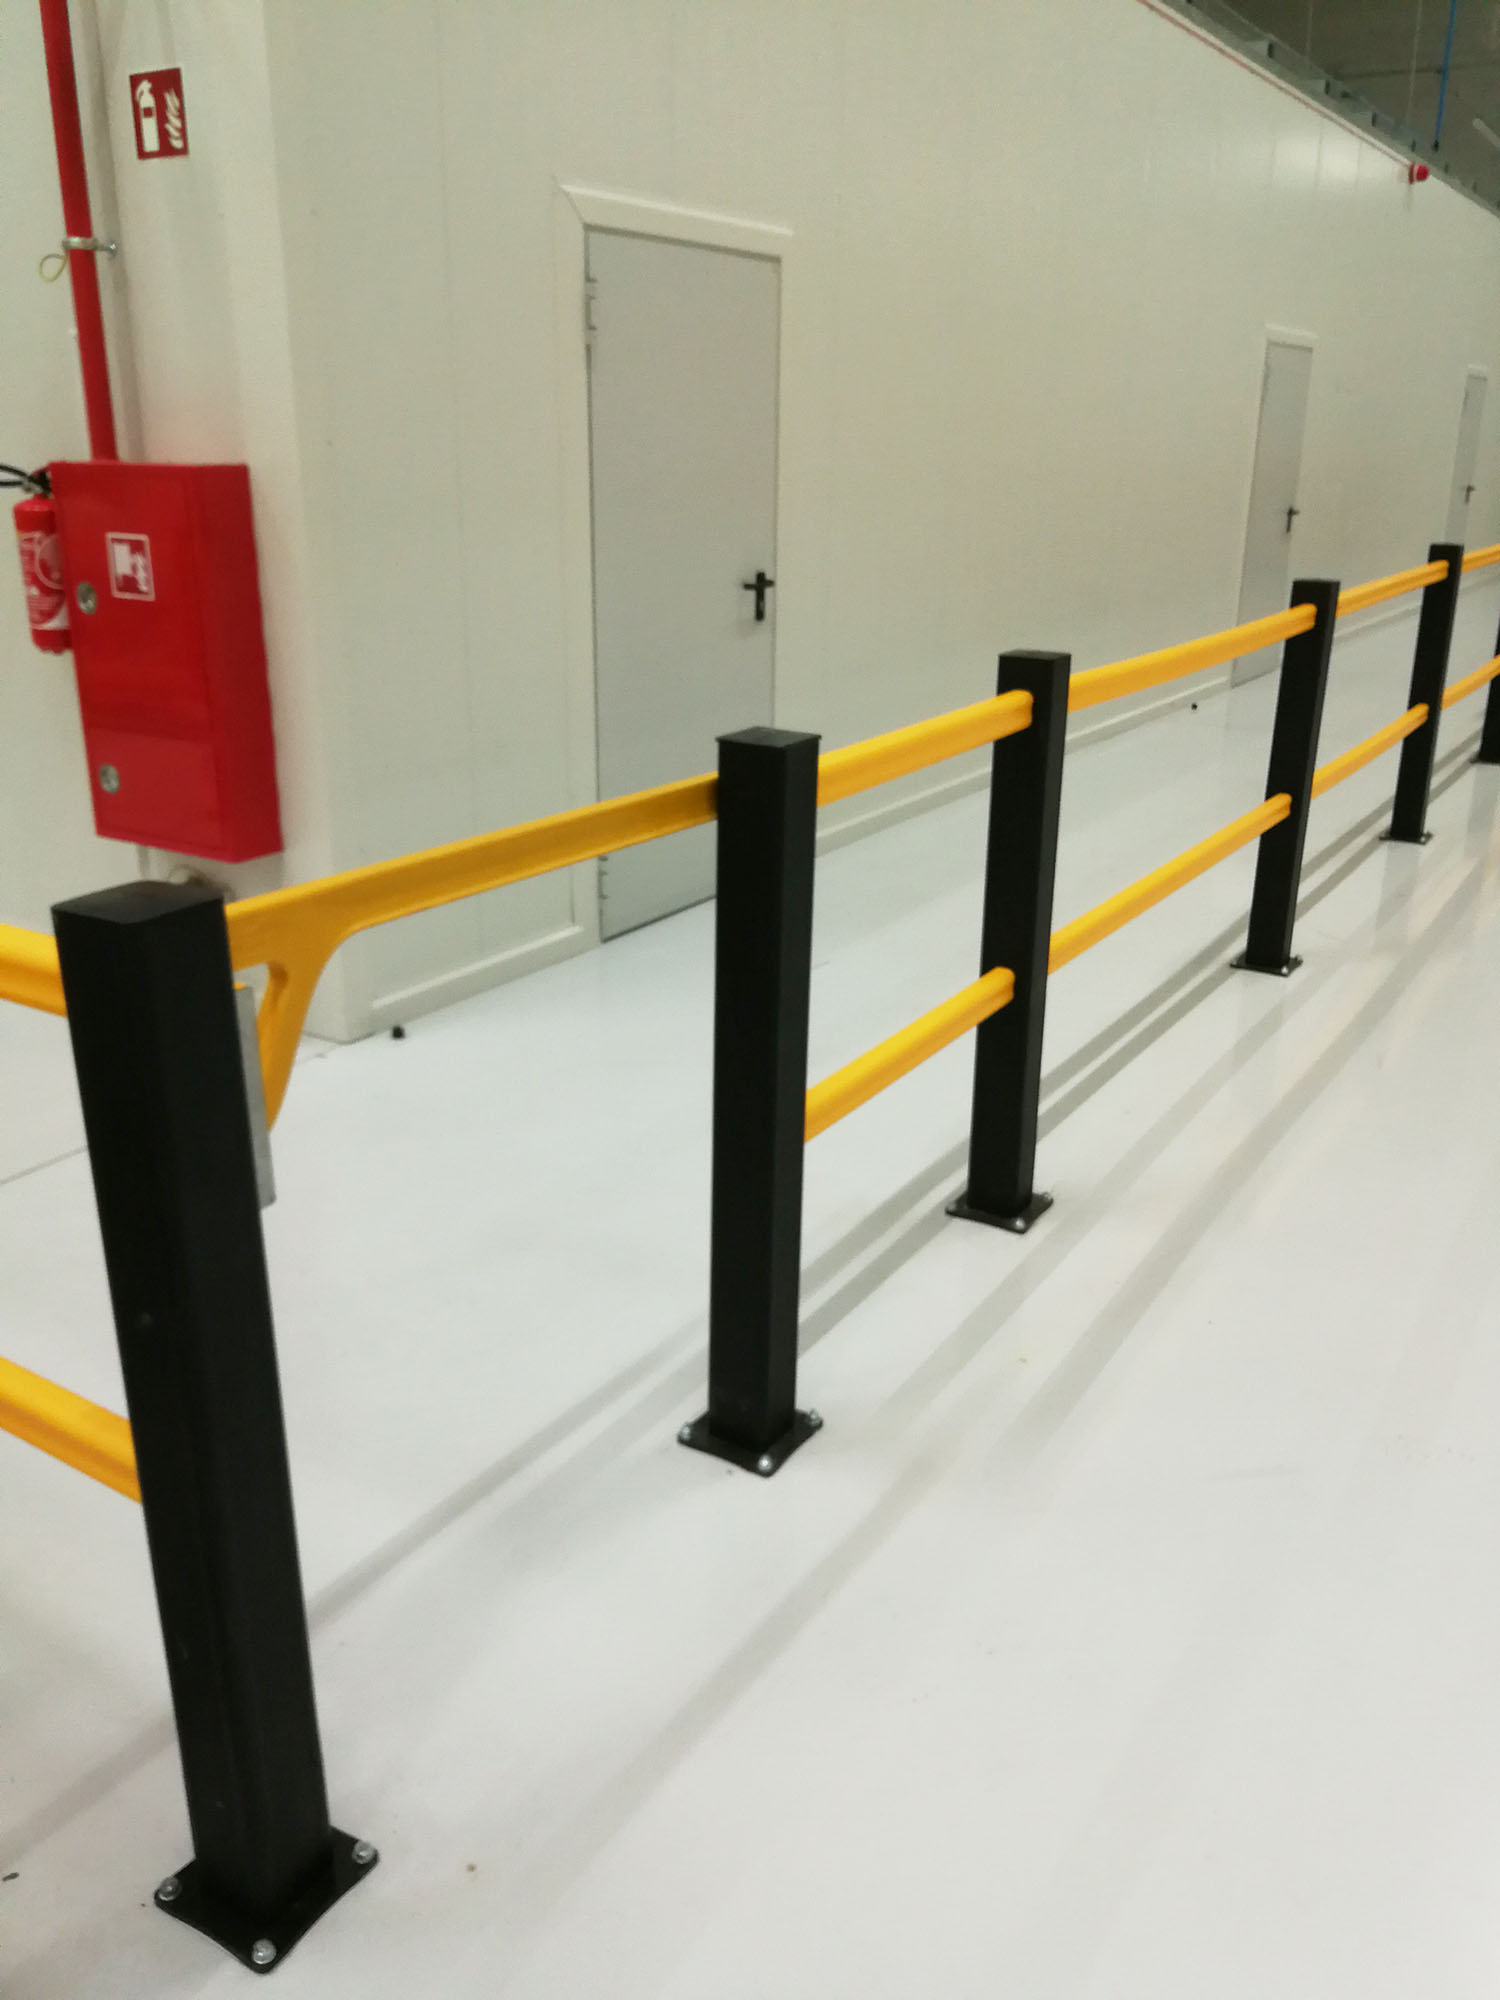 Safety bars on gate systems